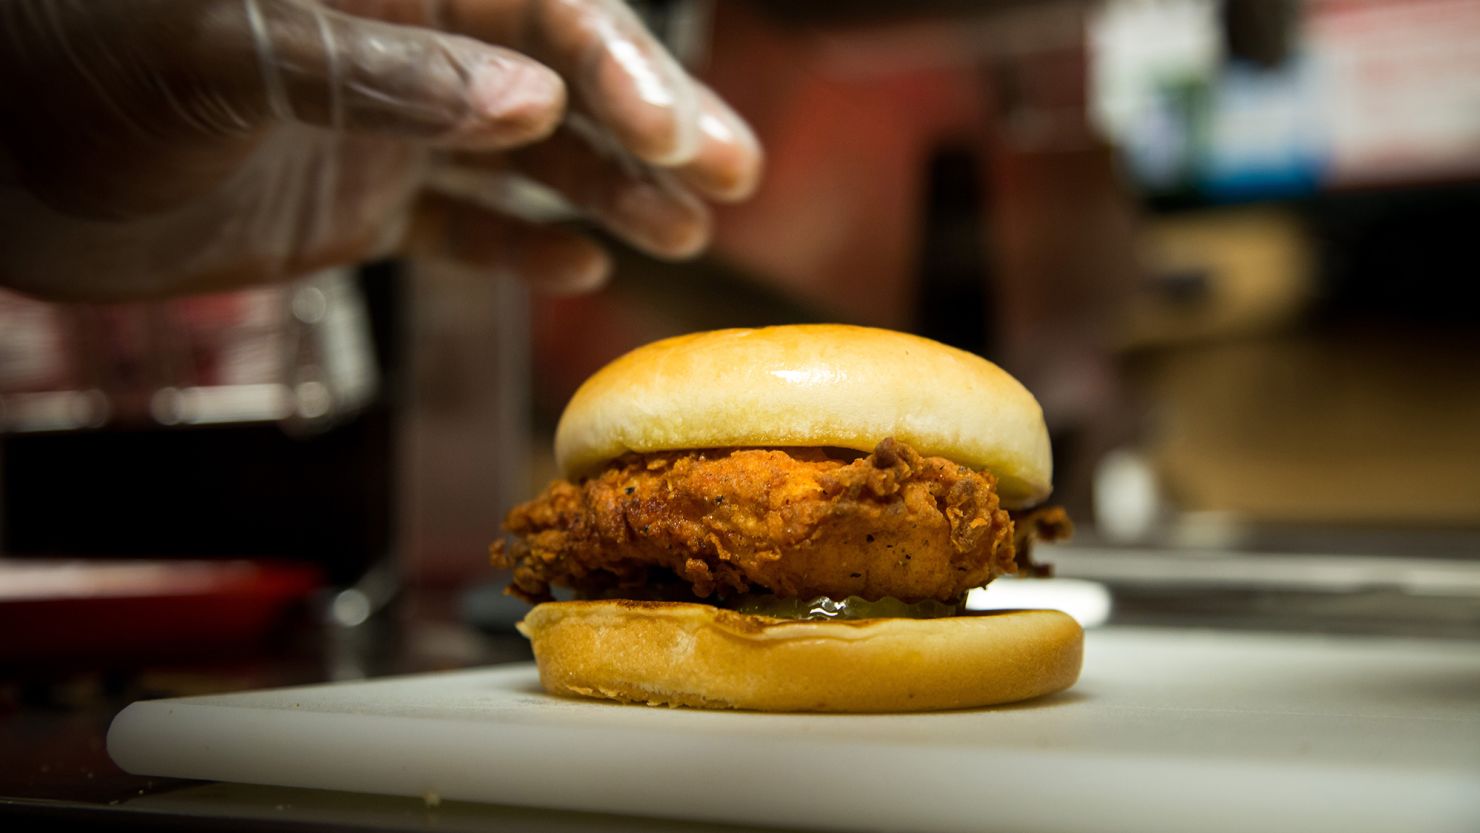 A employee picks up a fried chicken sandwich during an event ahead of the grand opening for a Chick-fil-A restaurant